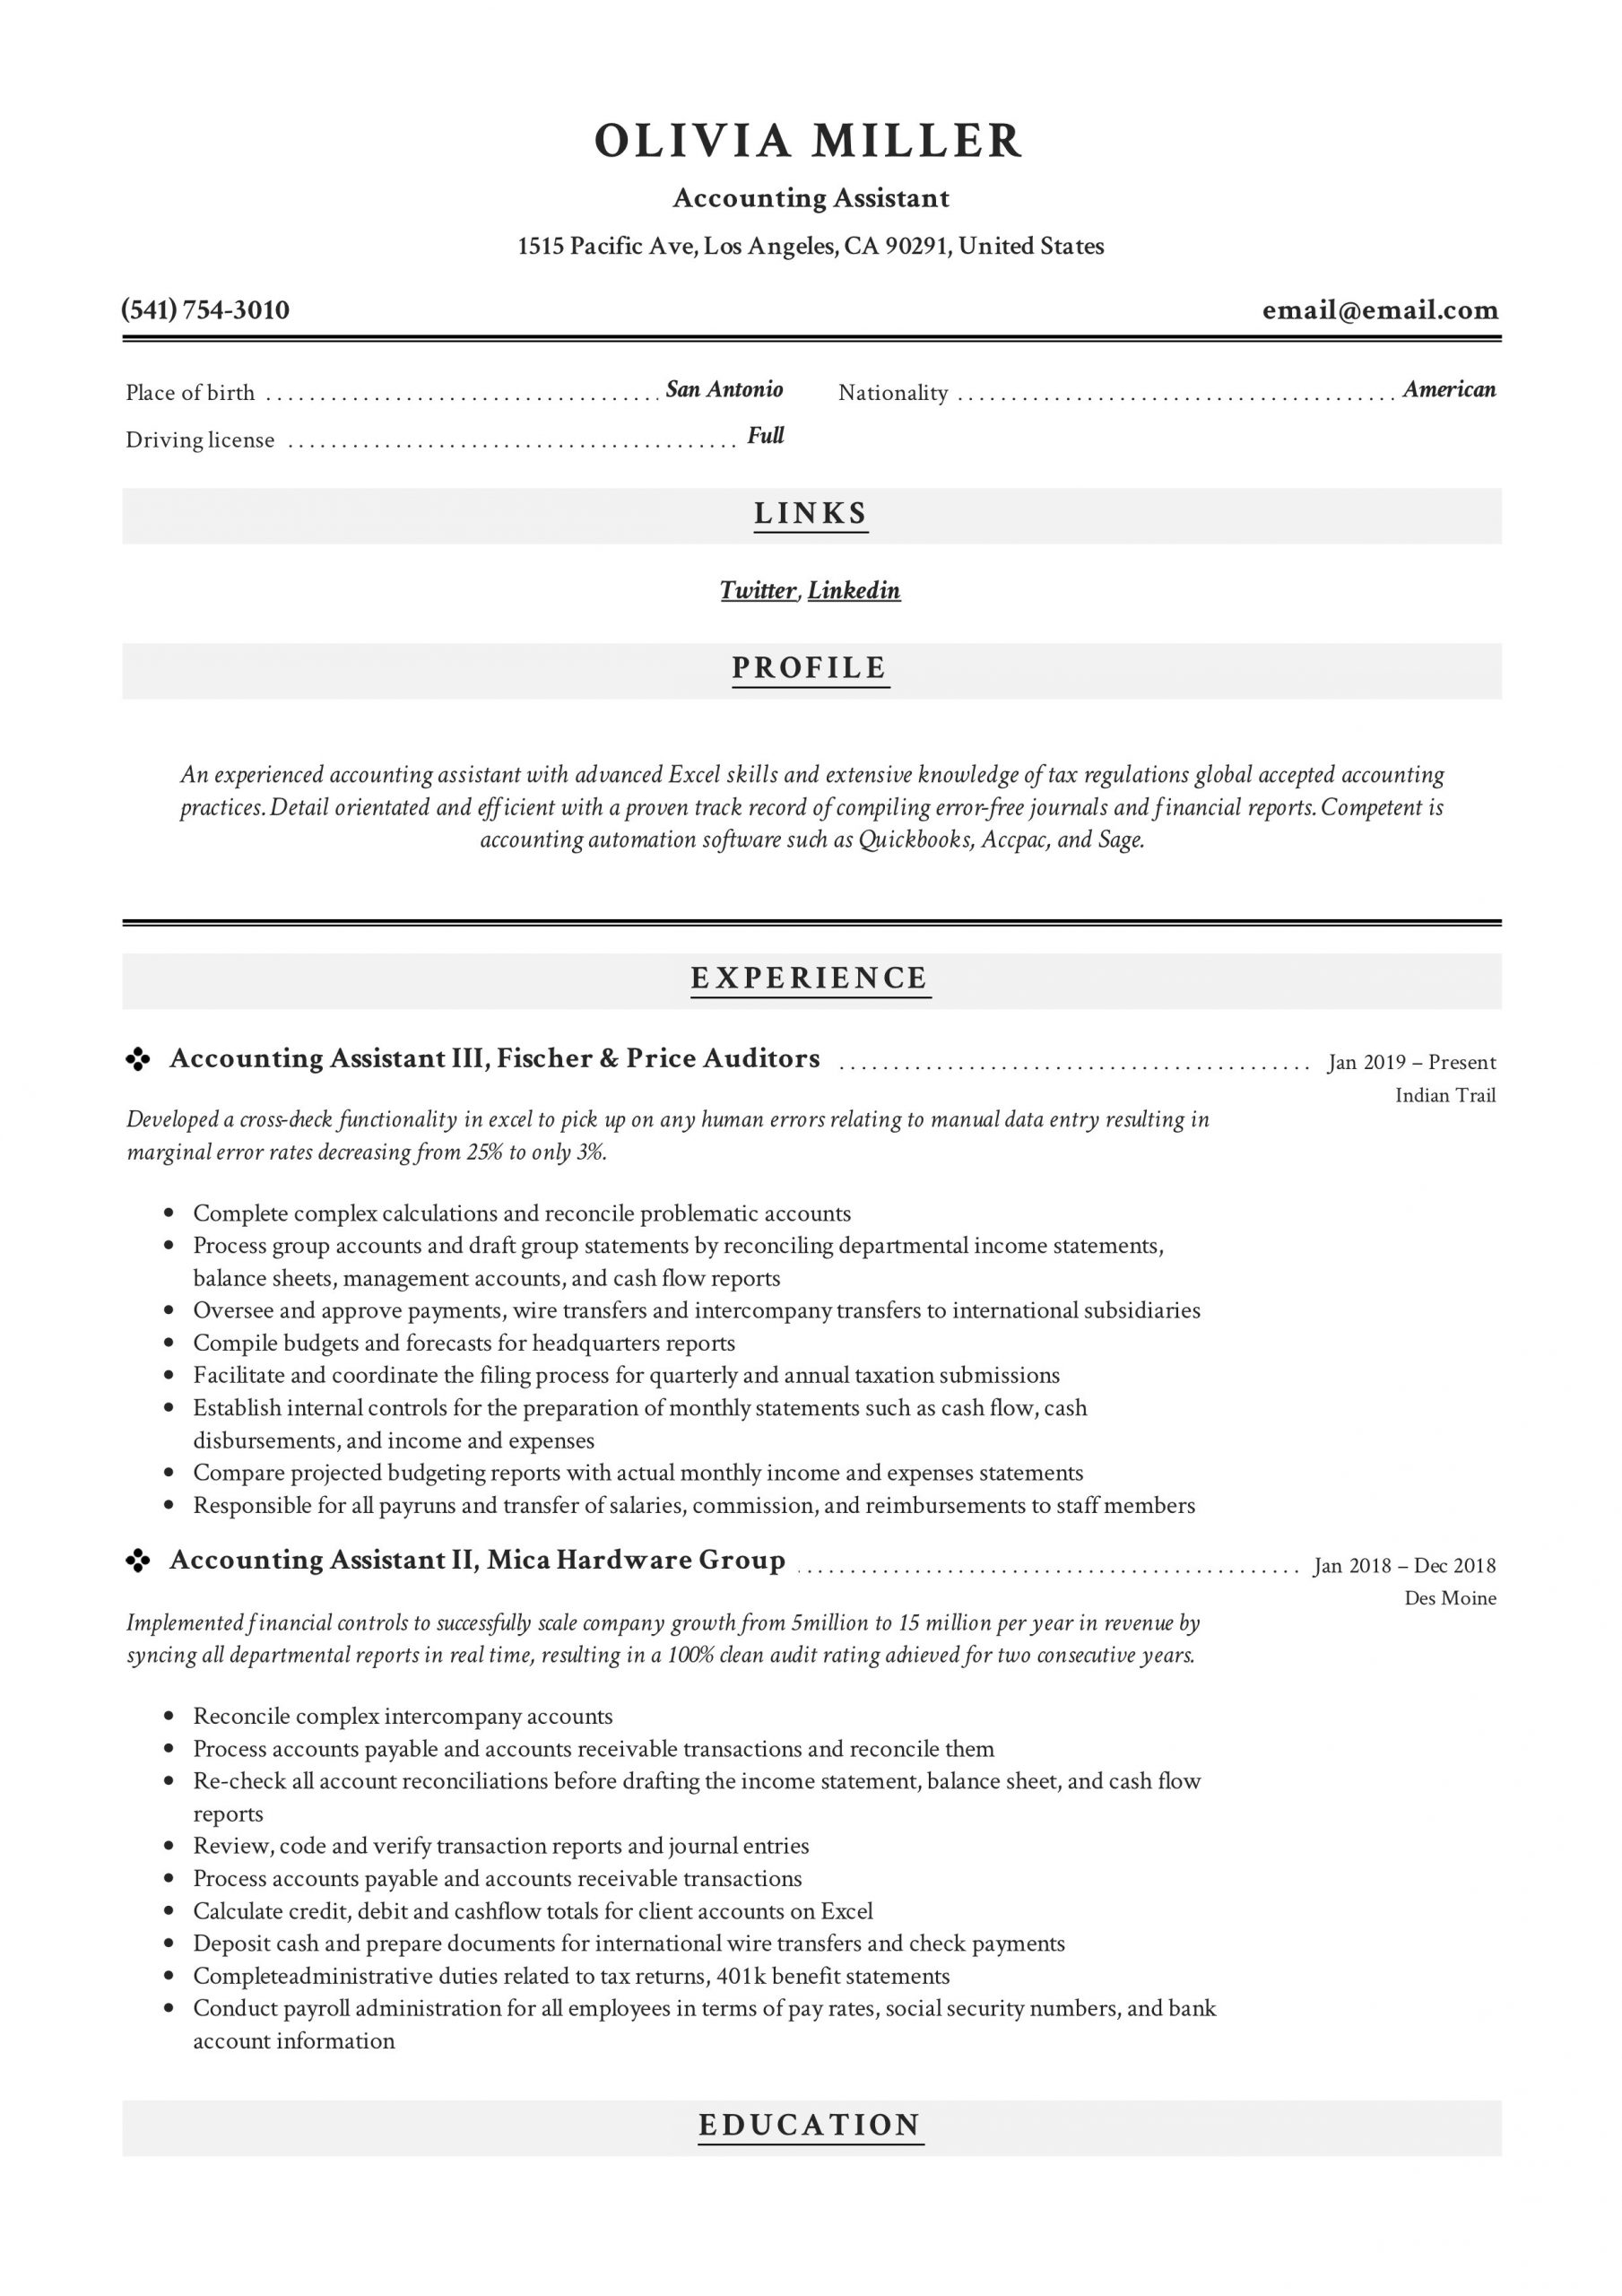 Resume Templates for Accounting and Finance Accounting & Finance Resume Examples – 2021 – Free – Pdf